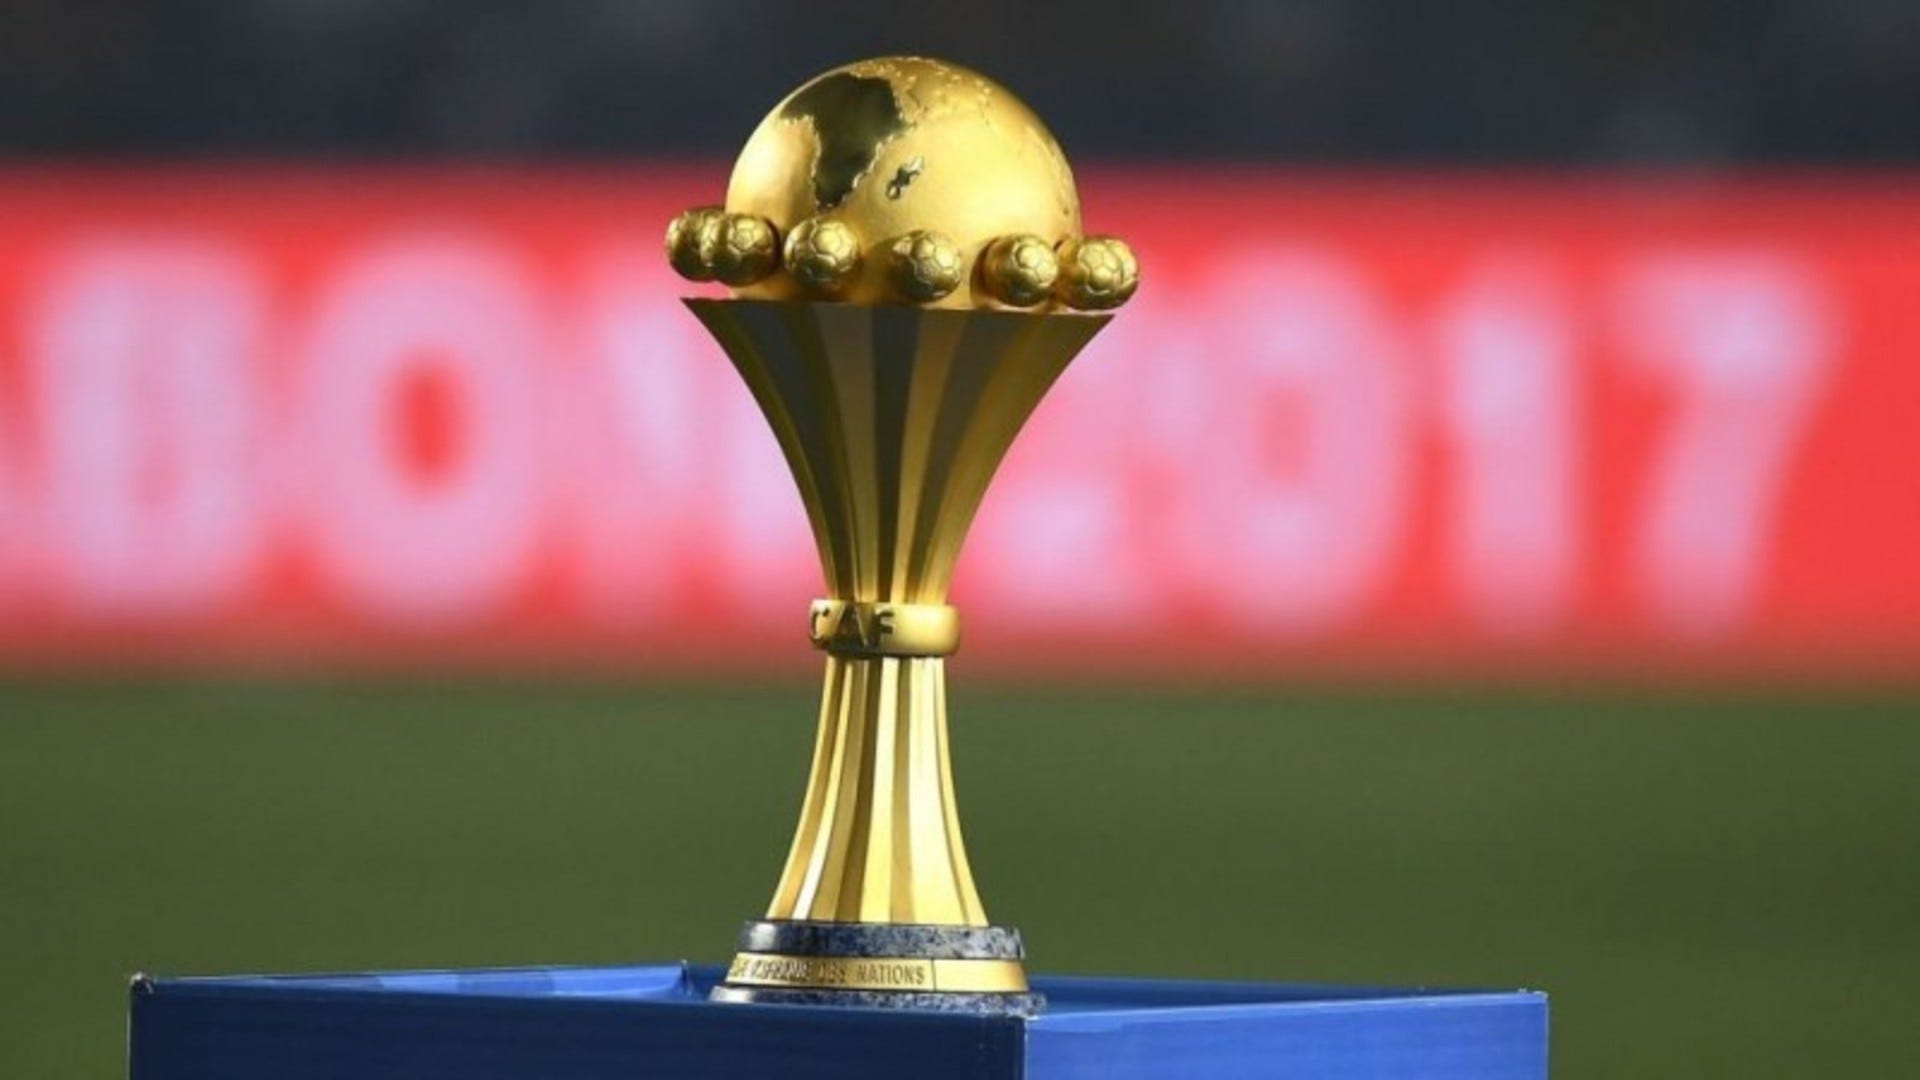 Afcon trophy.